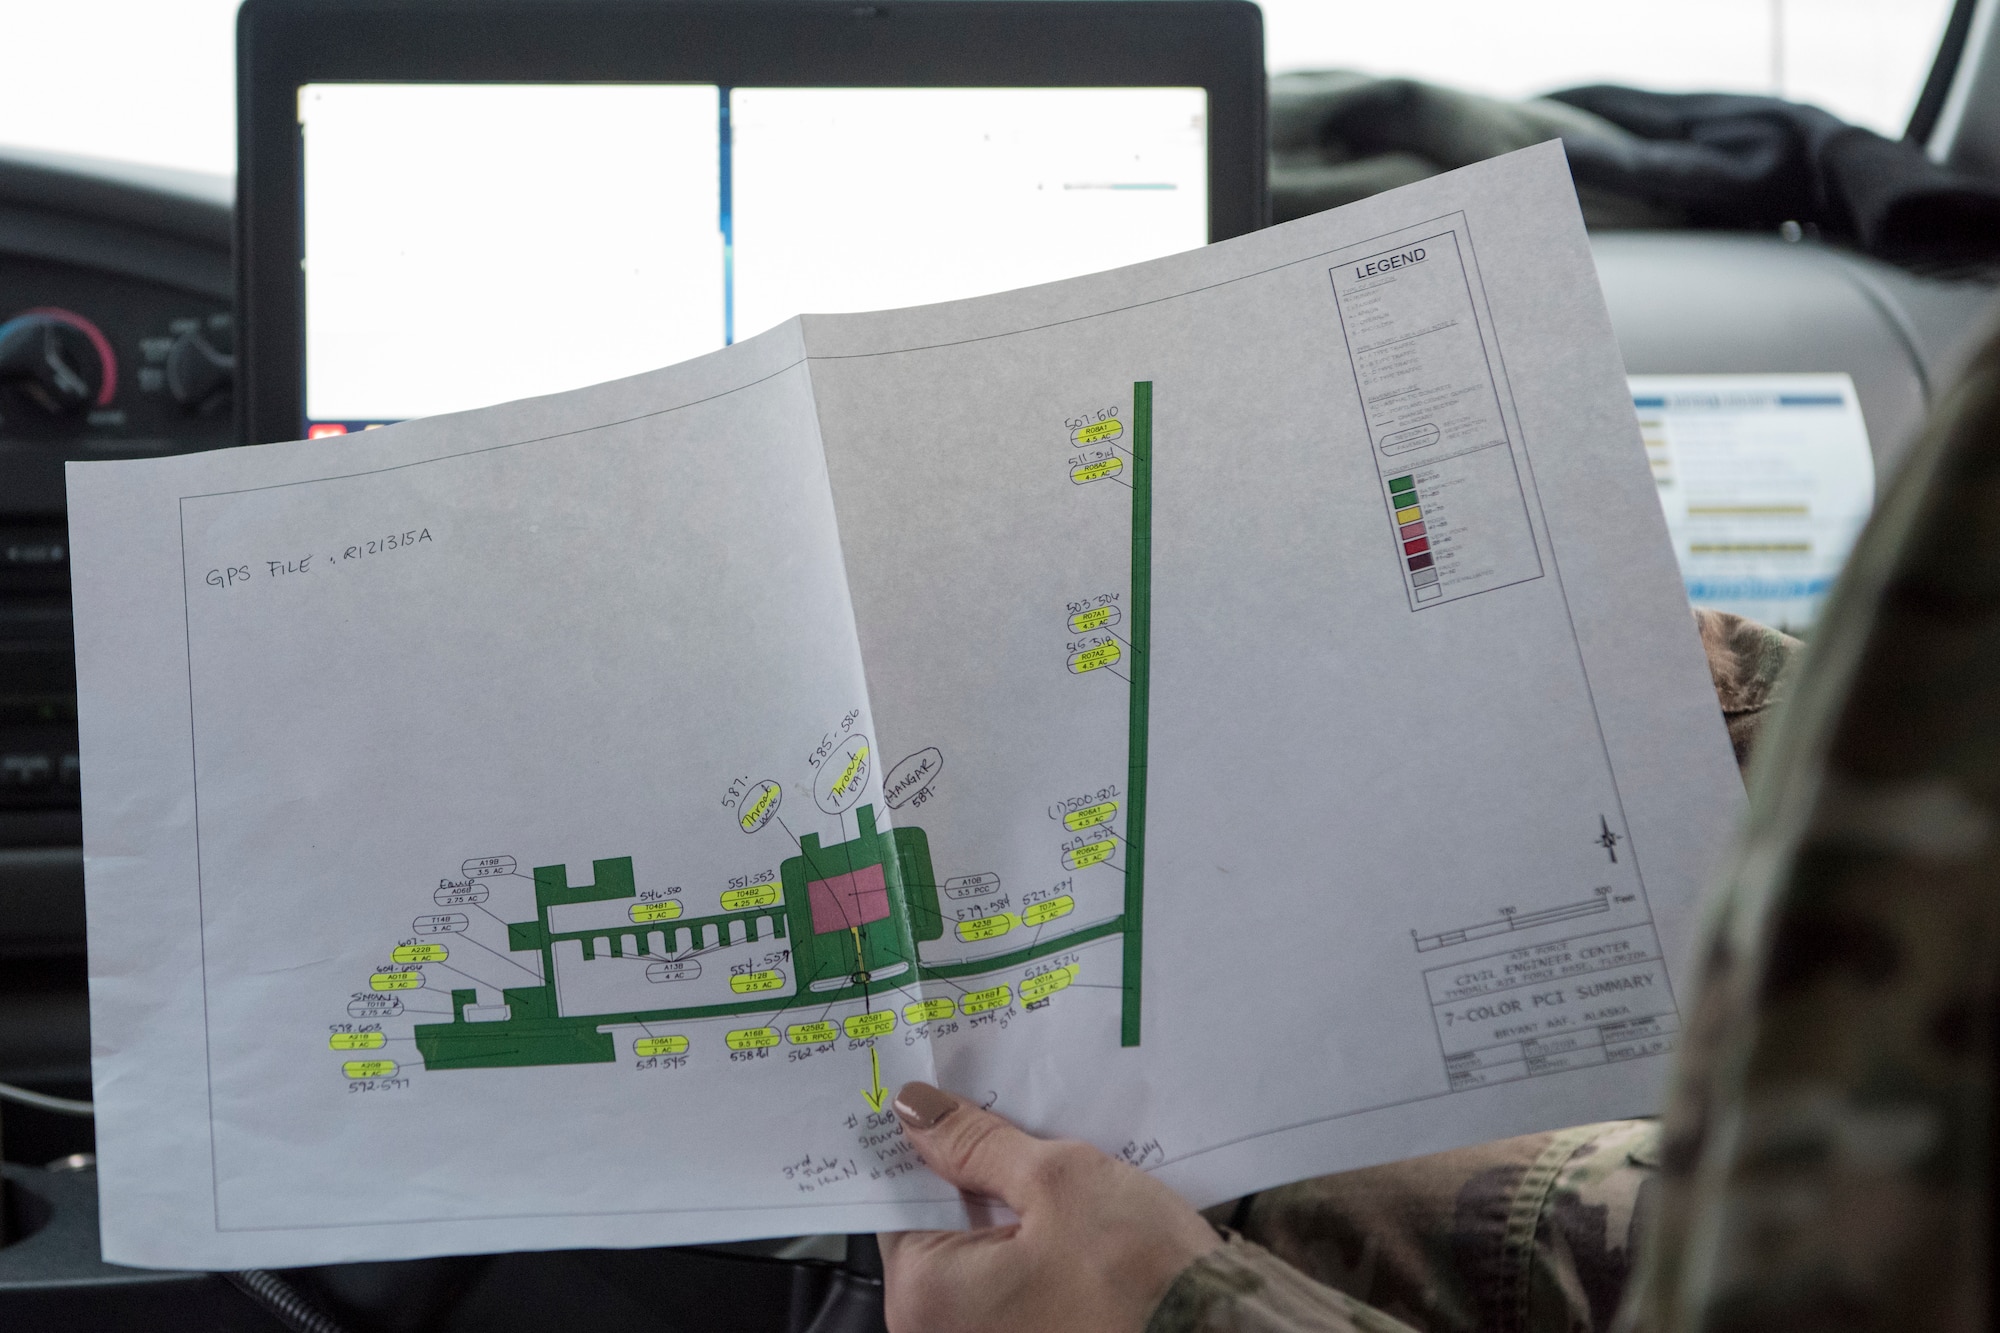 U.S. Air Force Master Sgt. Jill Reed, Air Force Civil Engineer Center’s Airfield Pavement Evaluation Team superintendent, holds a pavement section map during an evaluation of Bryant Army Airfield at Joint Base Elmendorf-Richardson, Alaska Dec. 17, 2018. A two-person team used non-destructive testing to assess potential non-visible pavement damage at all of JBER’s airfields following the Nov. 30, 7.0 magnitude earthquake, whose epicenter was located just north of the base. (U.S. Air Force photo by Airman 1st Class Crystal A. Jenkins)